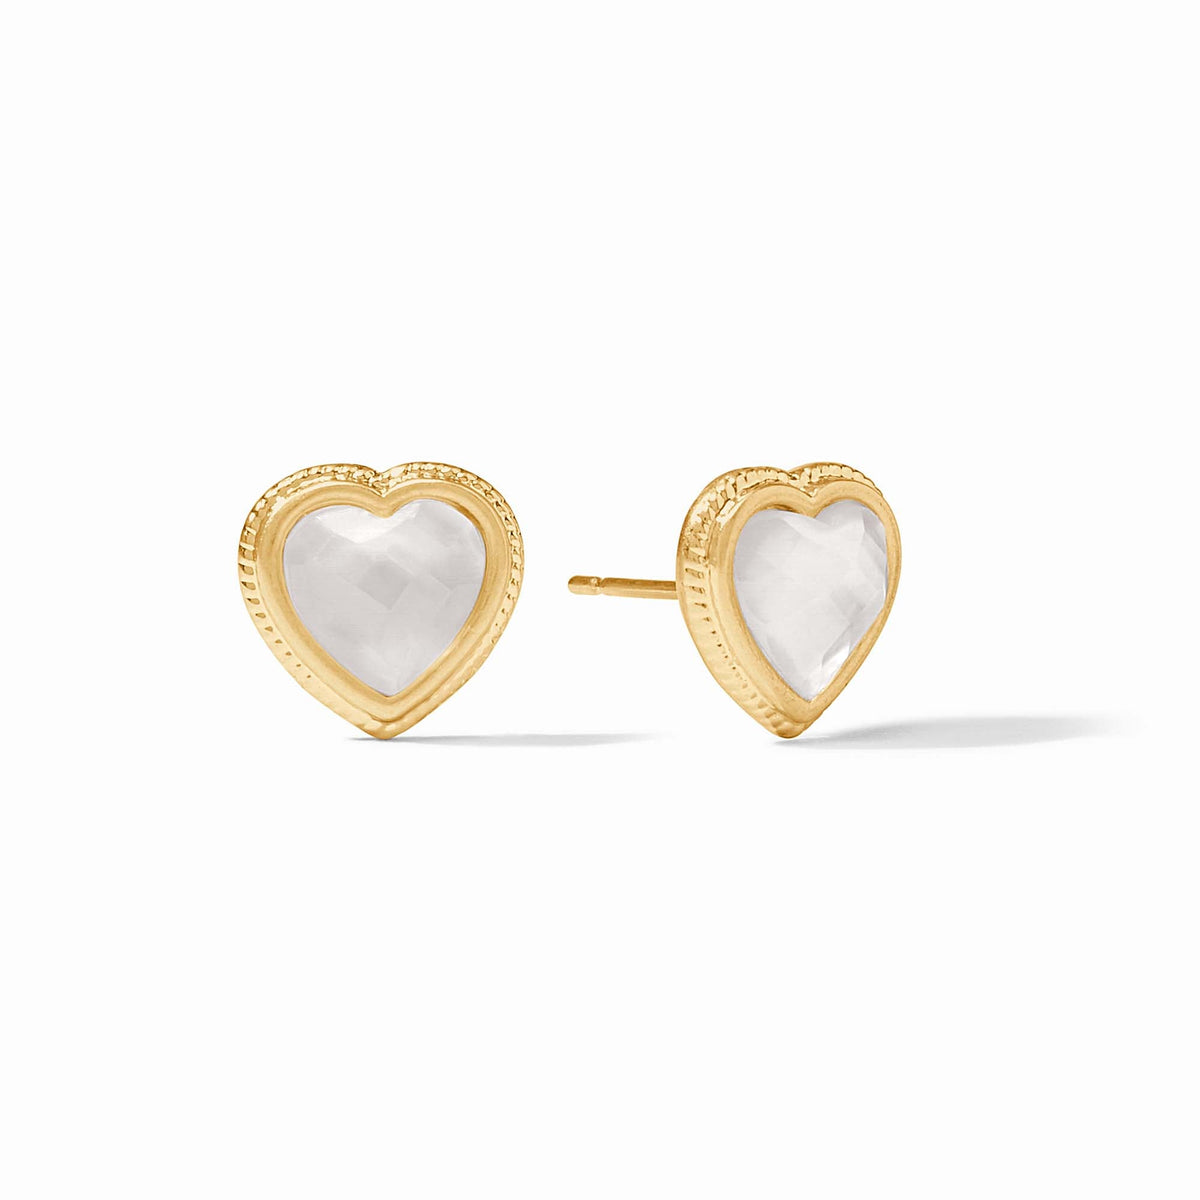 Julie Vos - Heart Stud, Iridescent Clear Crystal